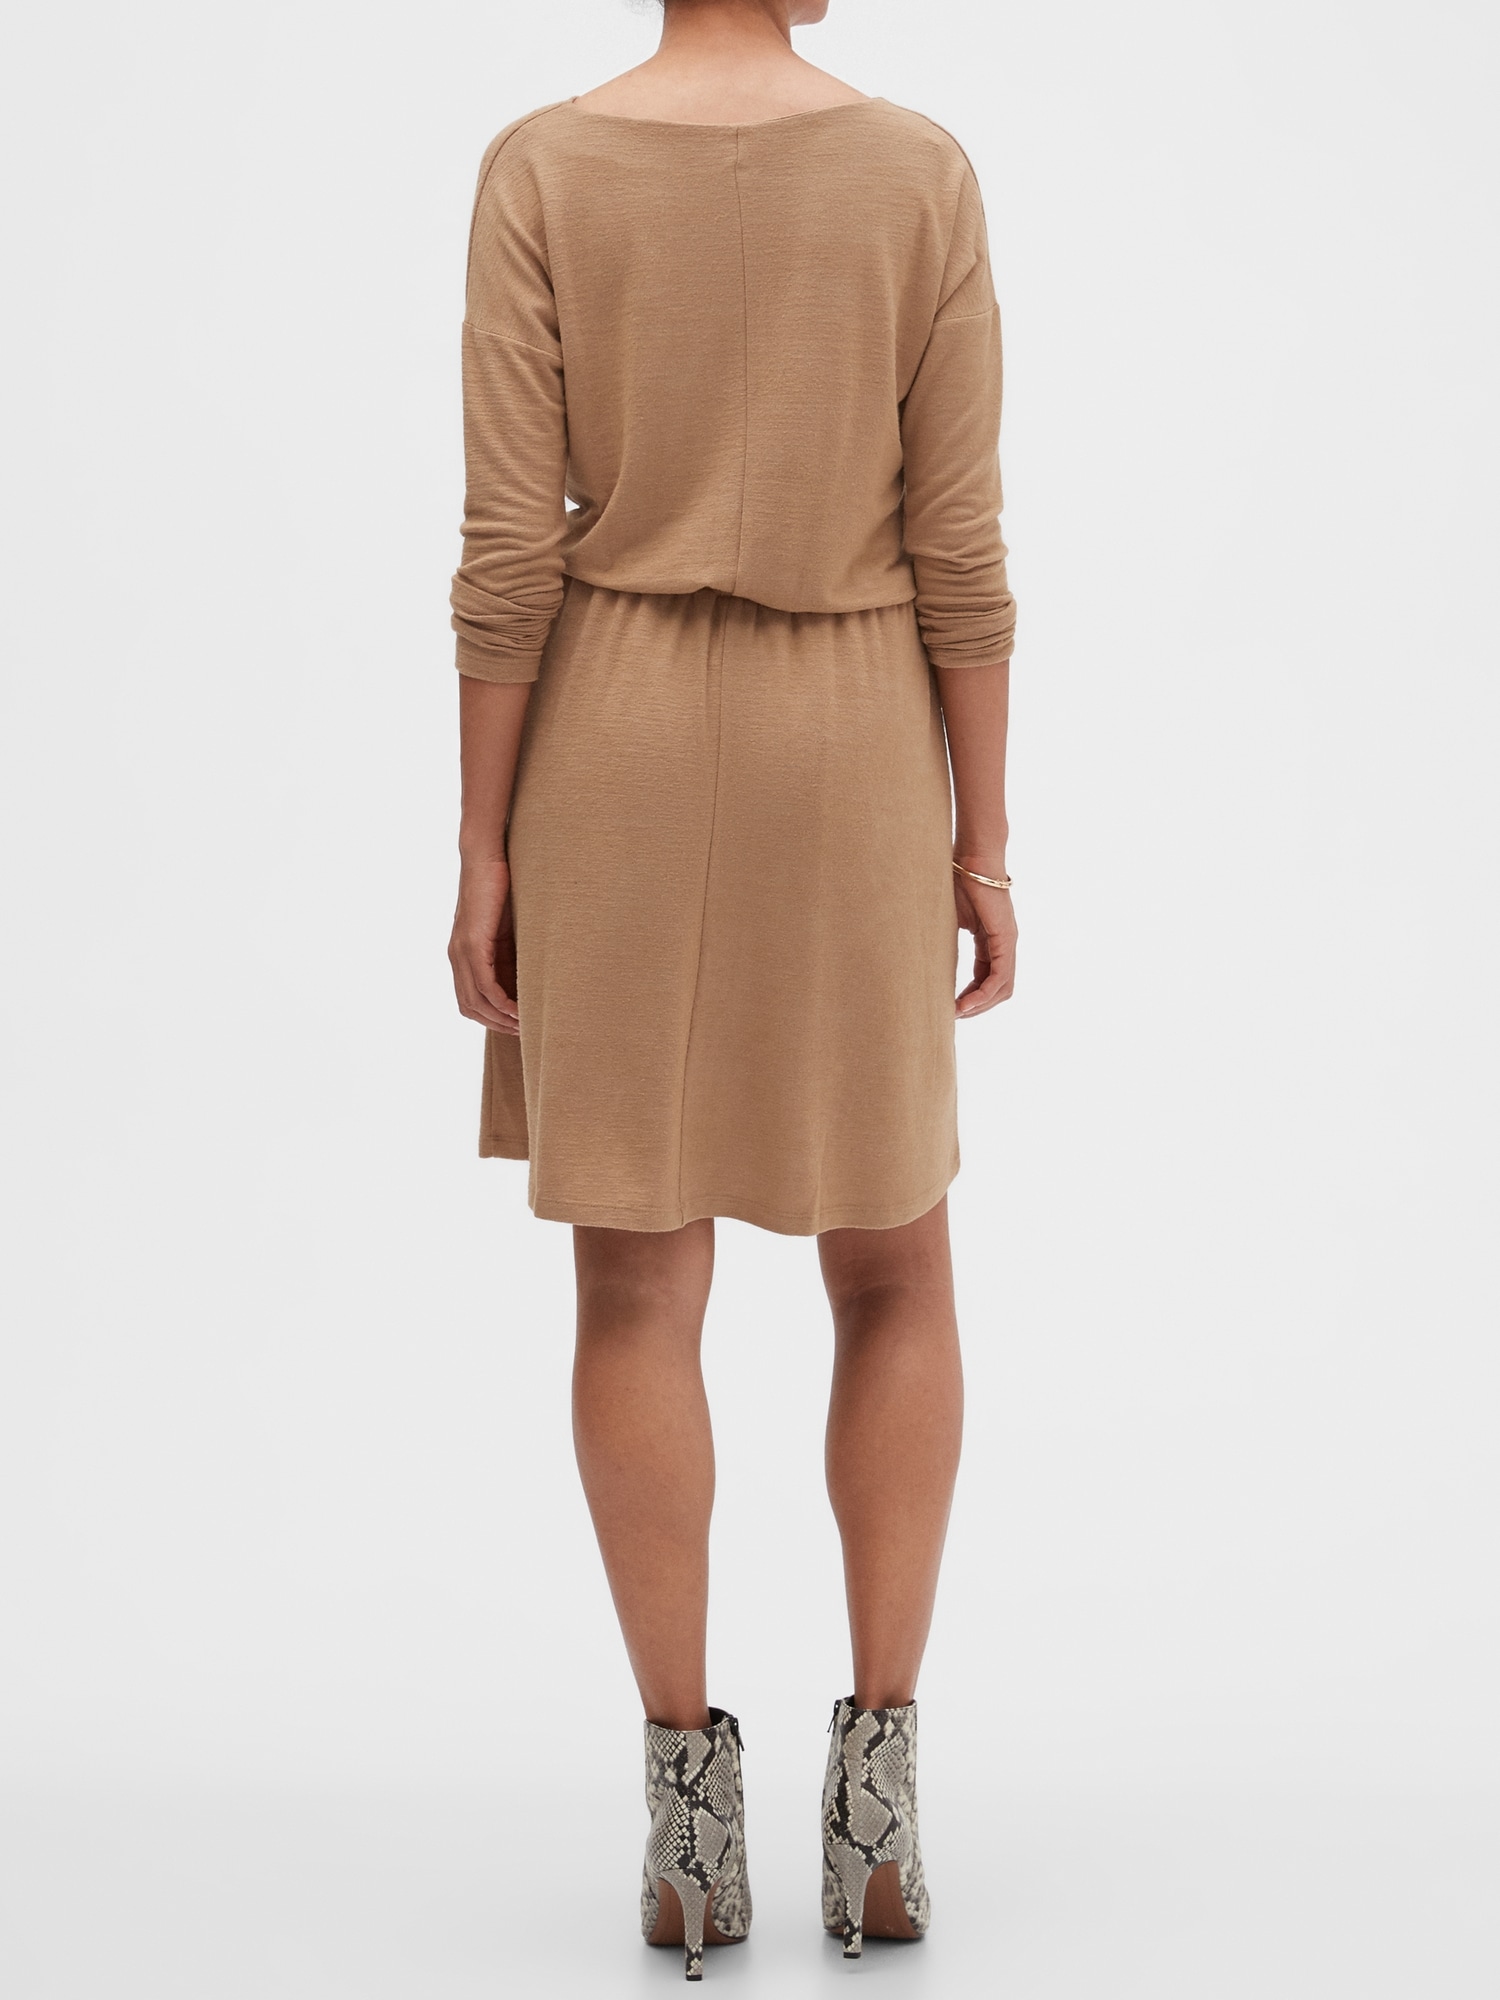 LuxeSpun Cowl-Neck Fit-and-Flare Dress